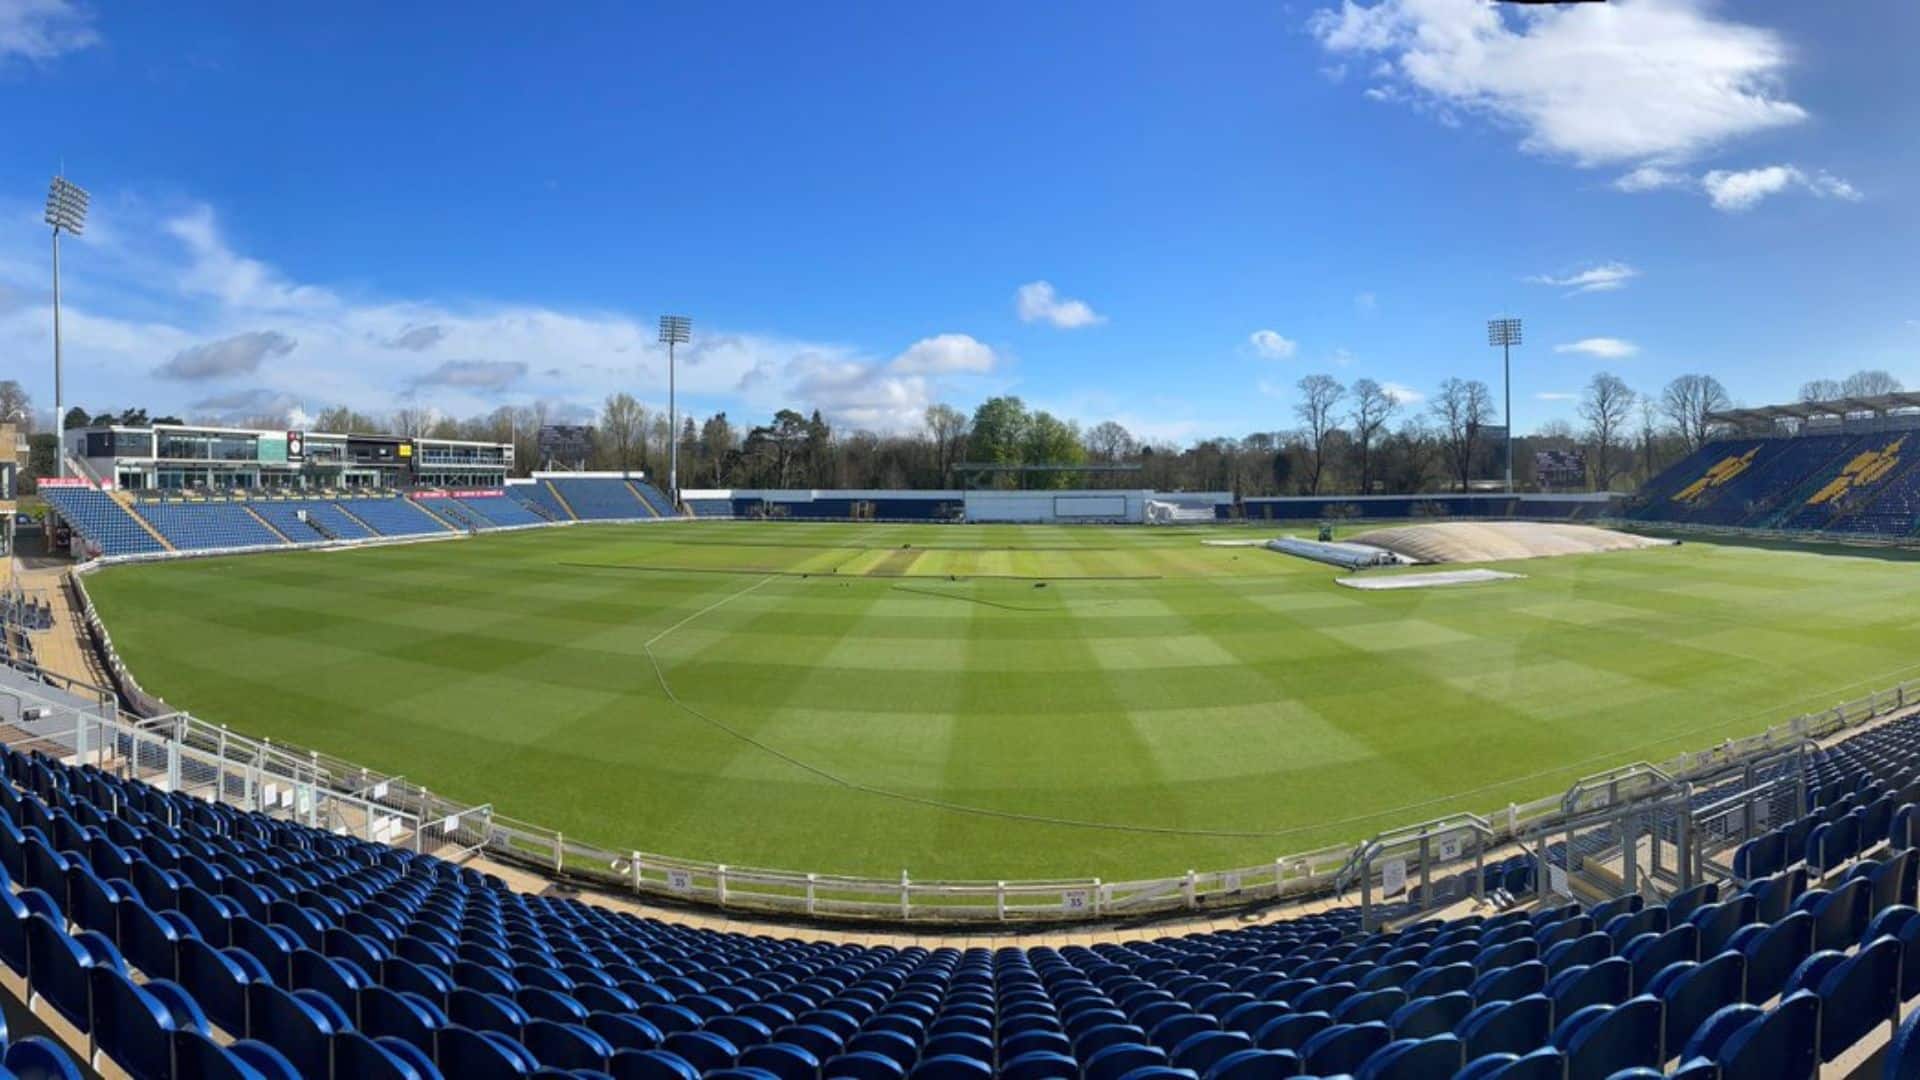 Sophia Gardens Cardiff Pitch Report For PAK vs ENG 3rd T20I